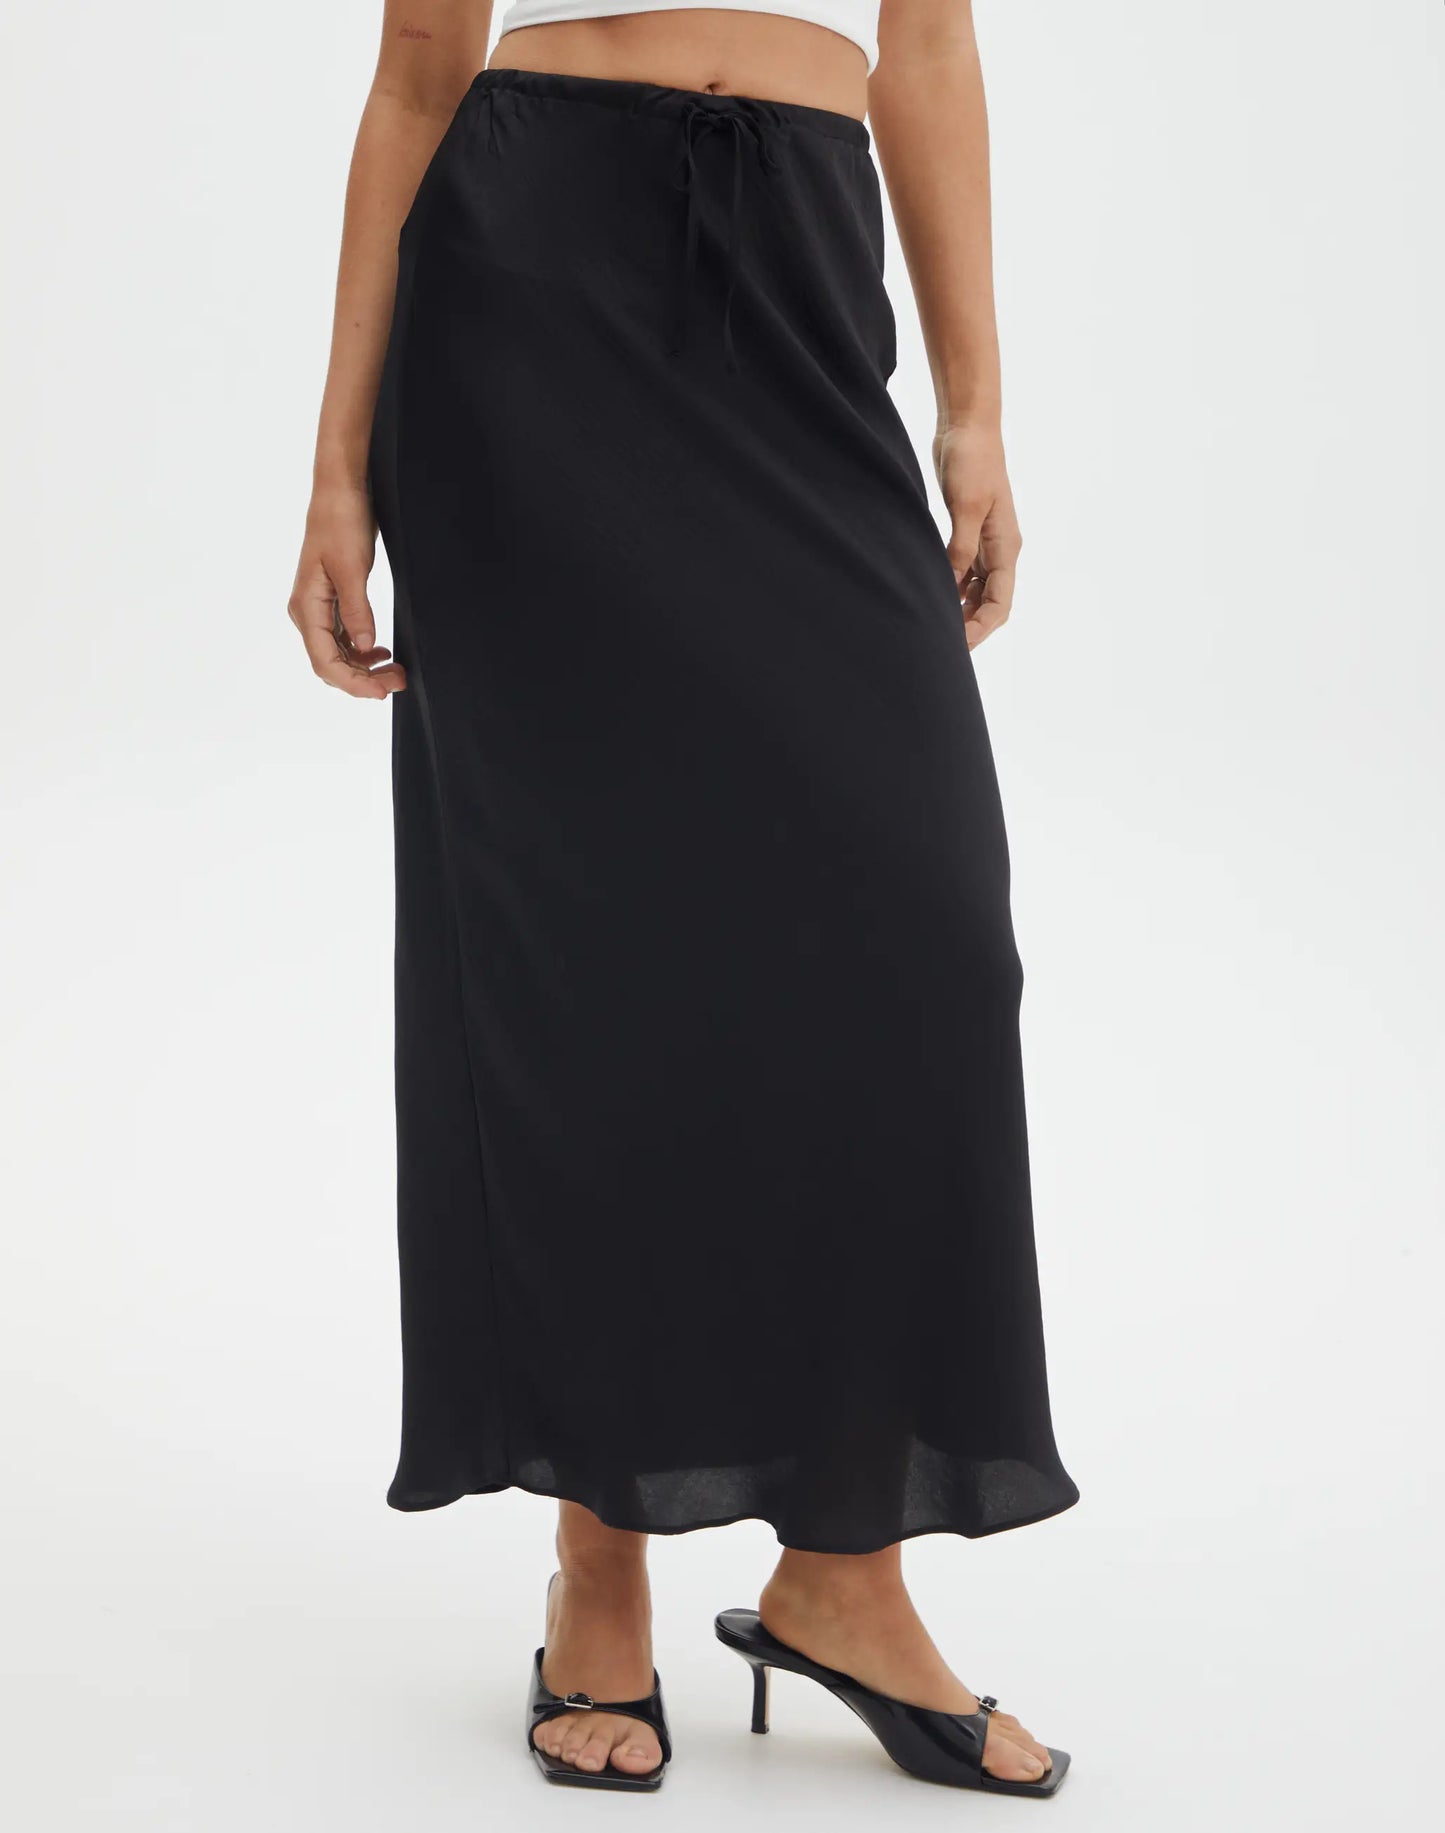 Satin Draw String Long Skirt - Wild and Heart